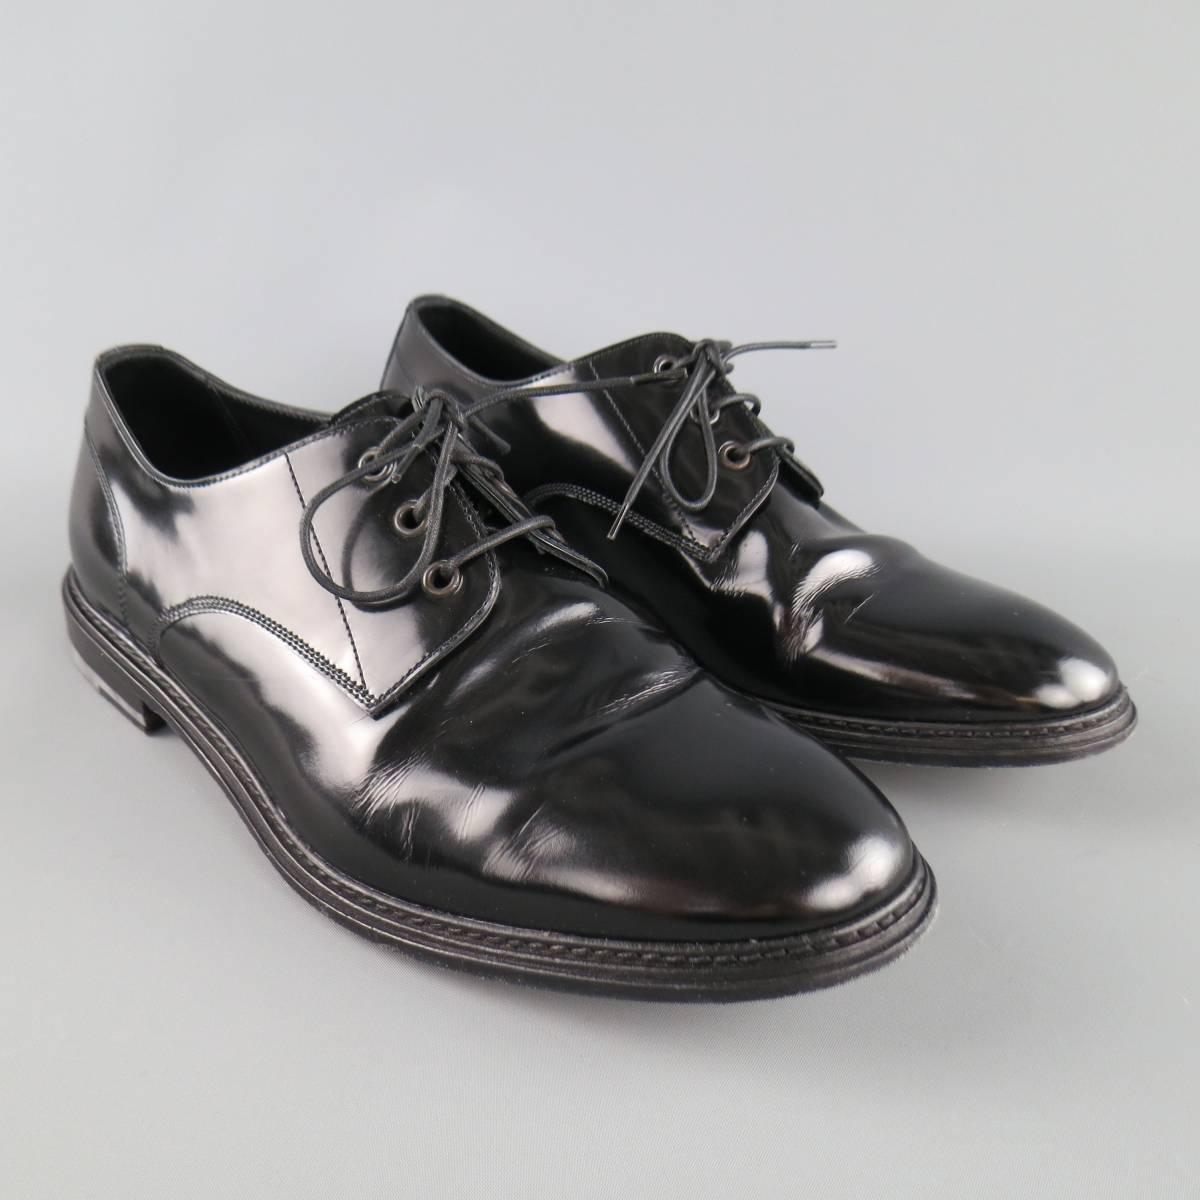 MARC JACOBS classic ;ace up derby shoes come in a glossy black leather and feature a round toe and oversized grommets. With box. Made in Croatia.
 
Good Pre-Owned Condition.
Marked: 9
 
Outsole: 12.25 x 4.5 in.


Web ID: 82913 